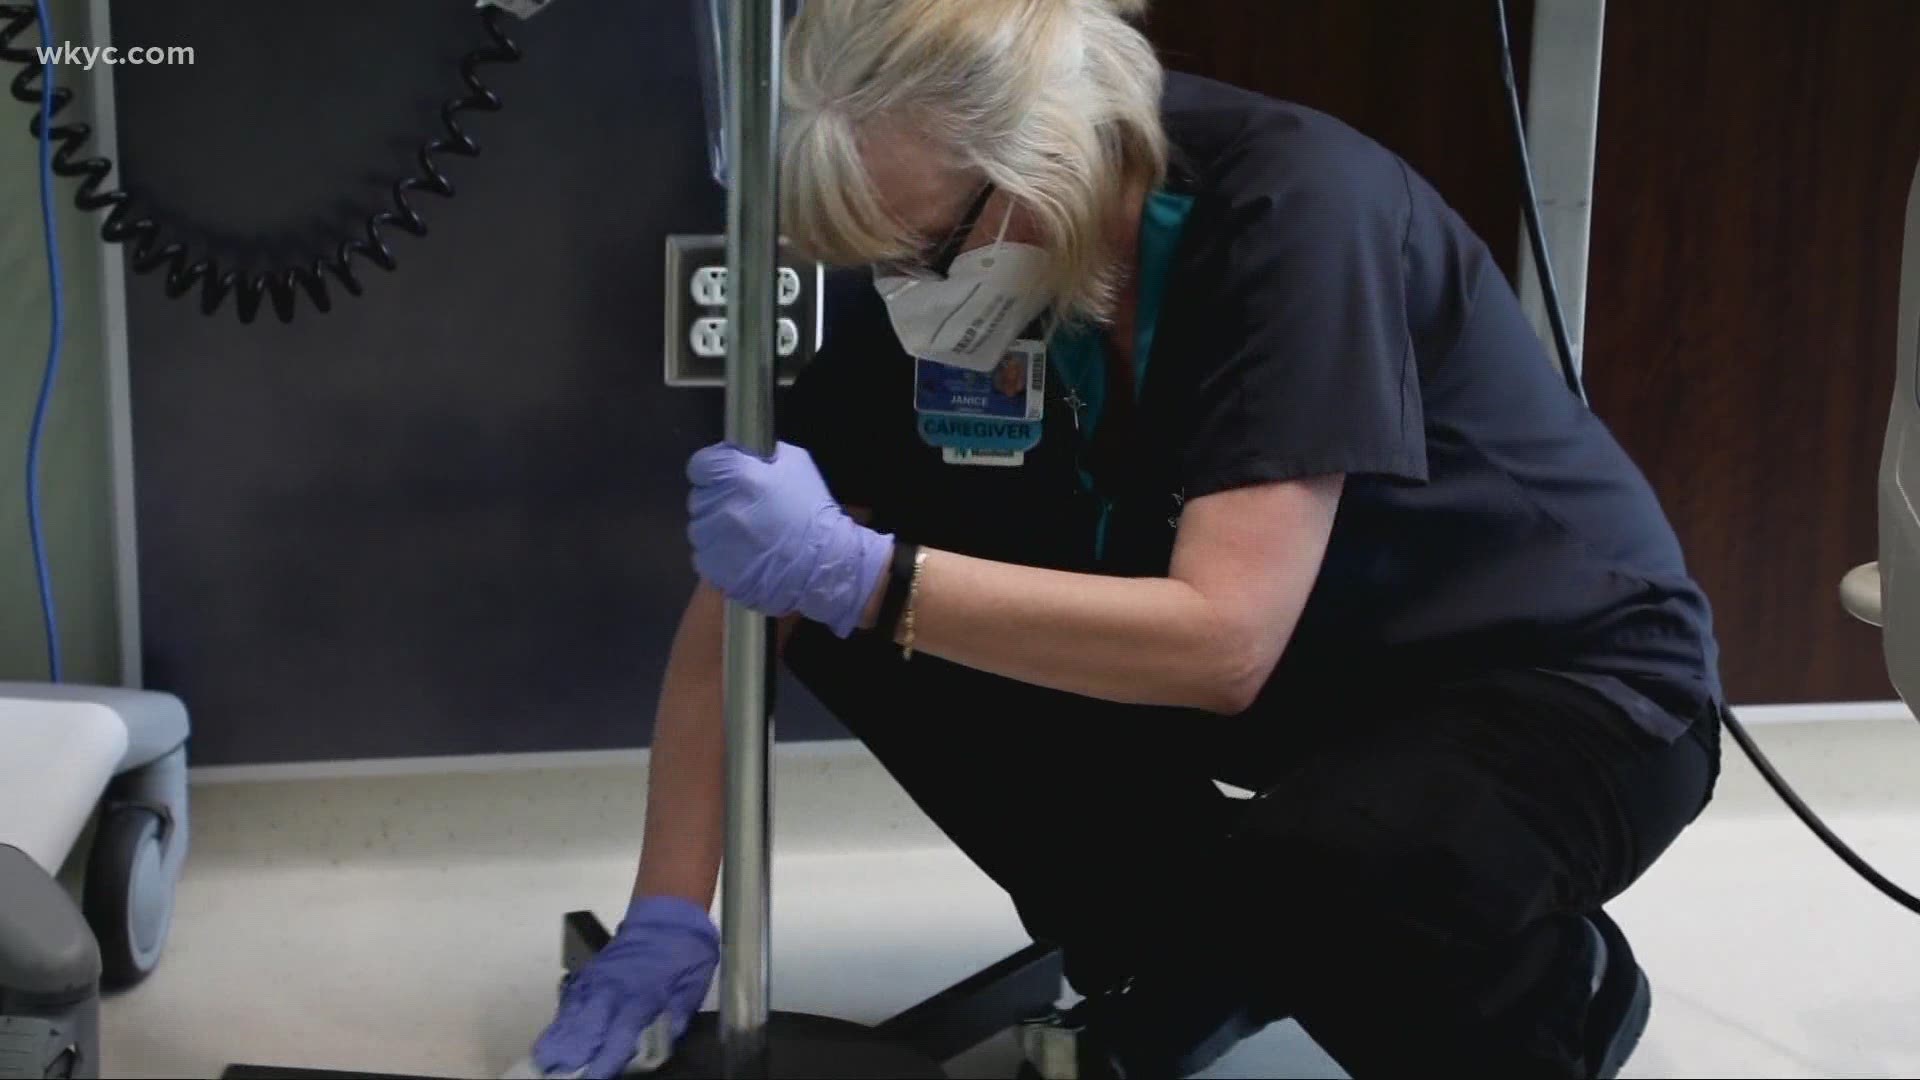 We know about doctors & nurses, but what about those who do the 'dirty' work? Monica Robins spoke to a woman responsible for cleaning the hospital rooms.